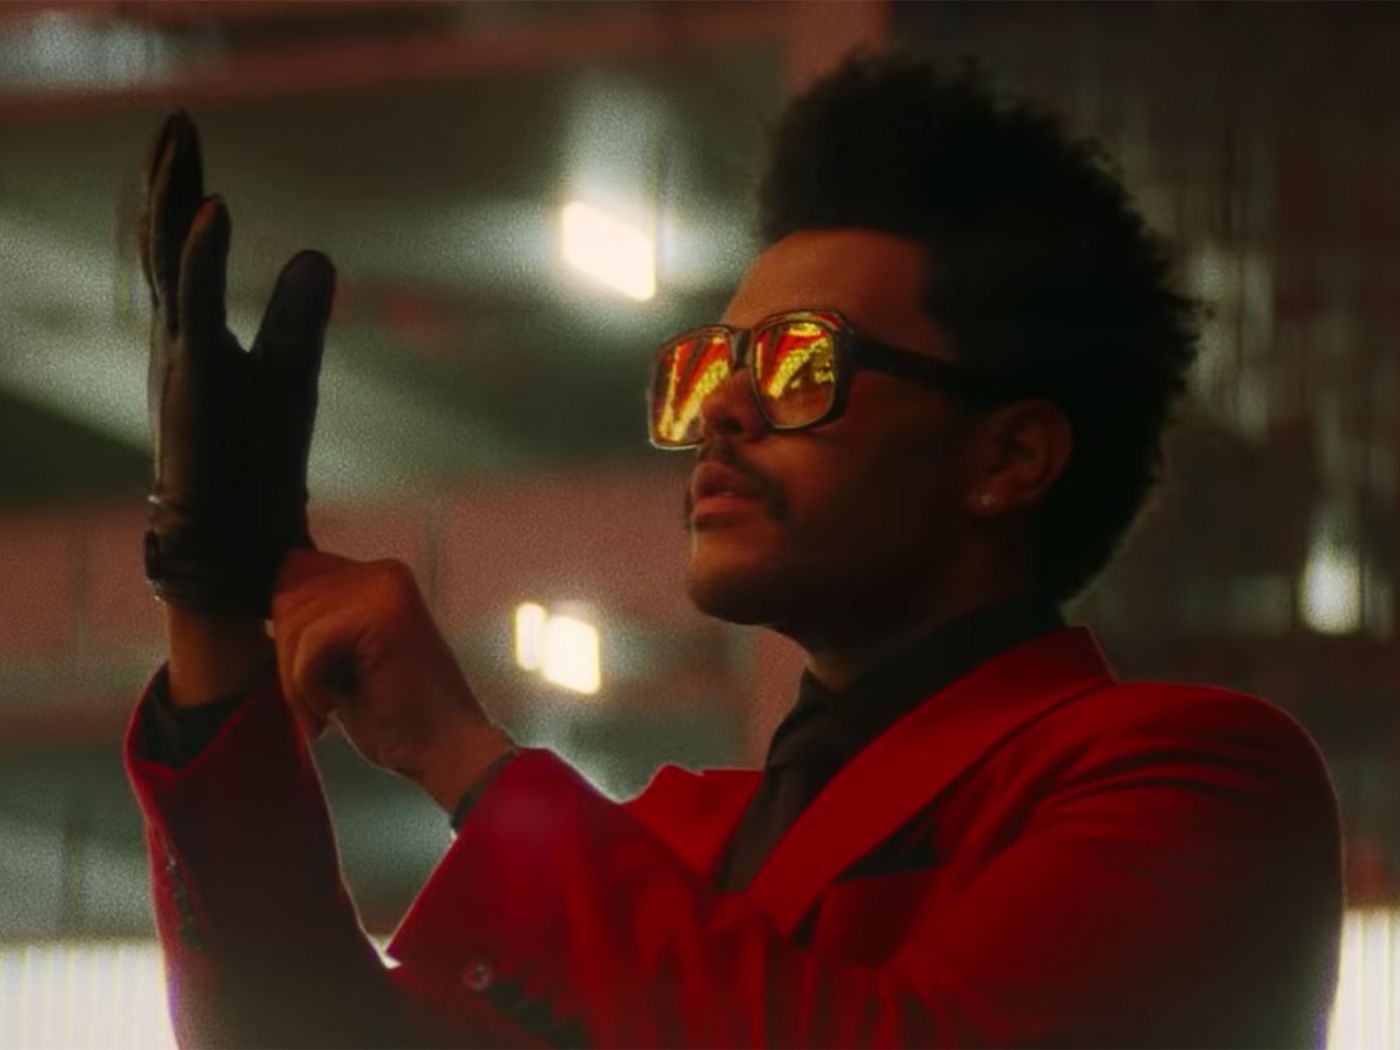 The Weeknd's “Blinding Lights” video is phenomenal